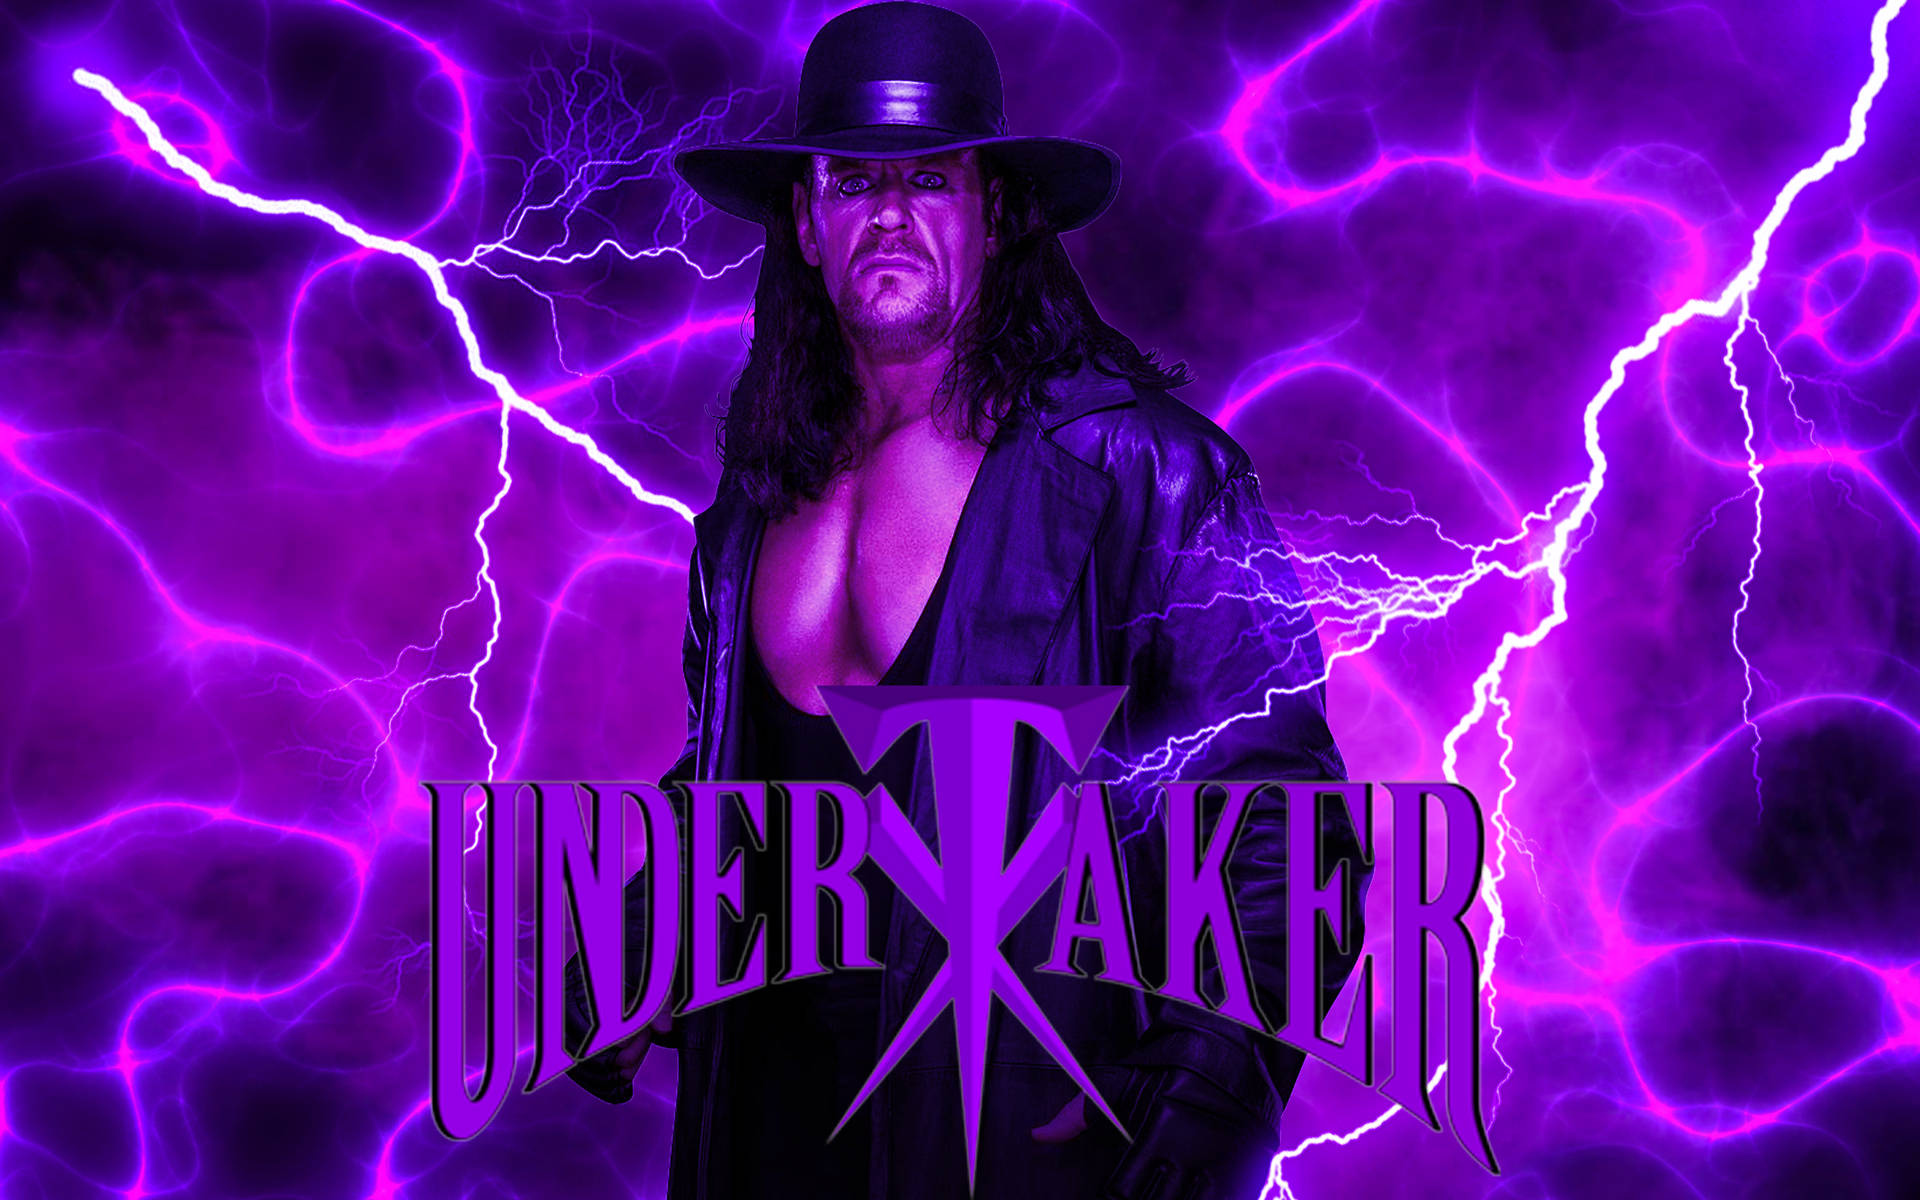 Free The Undertaker Wallpaper Downloads, The Undertaker Wallpaper for FREE